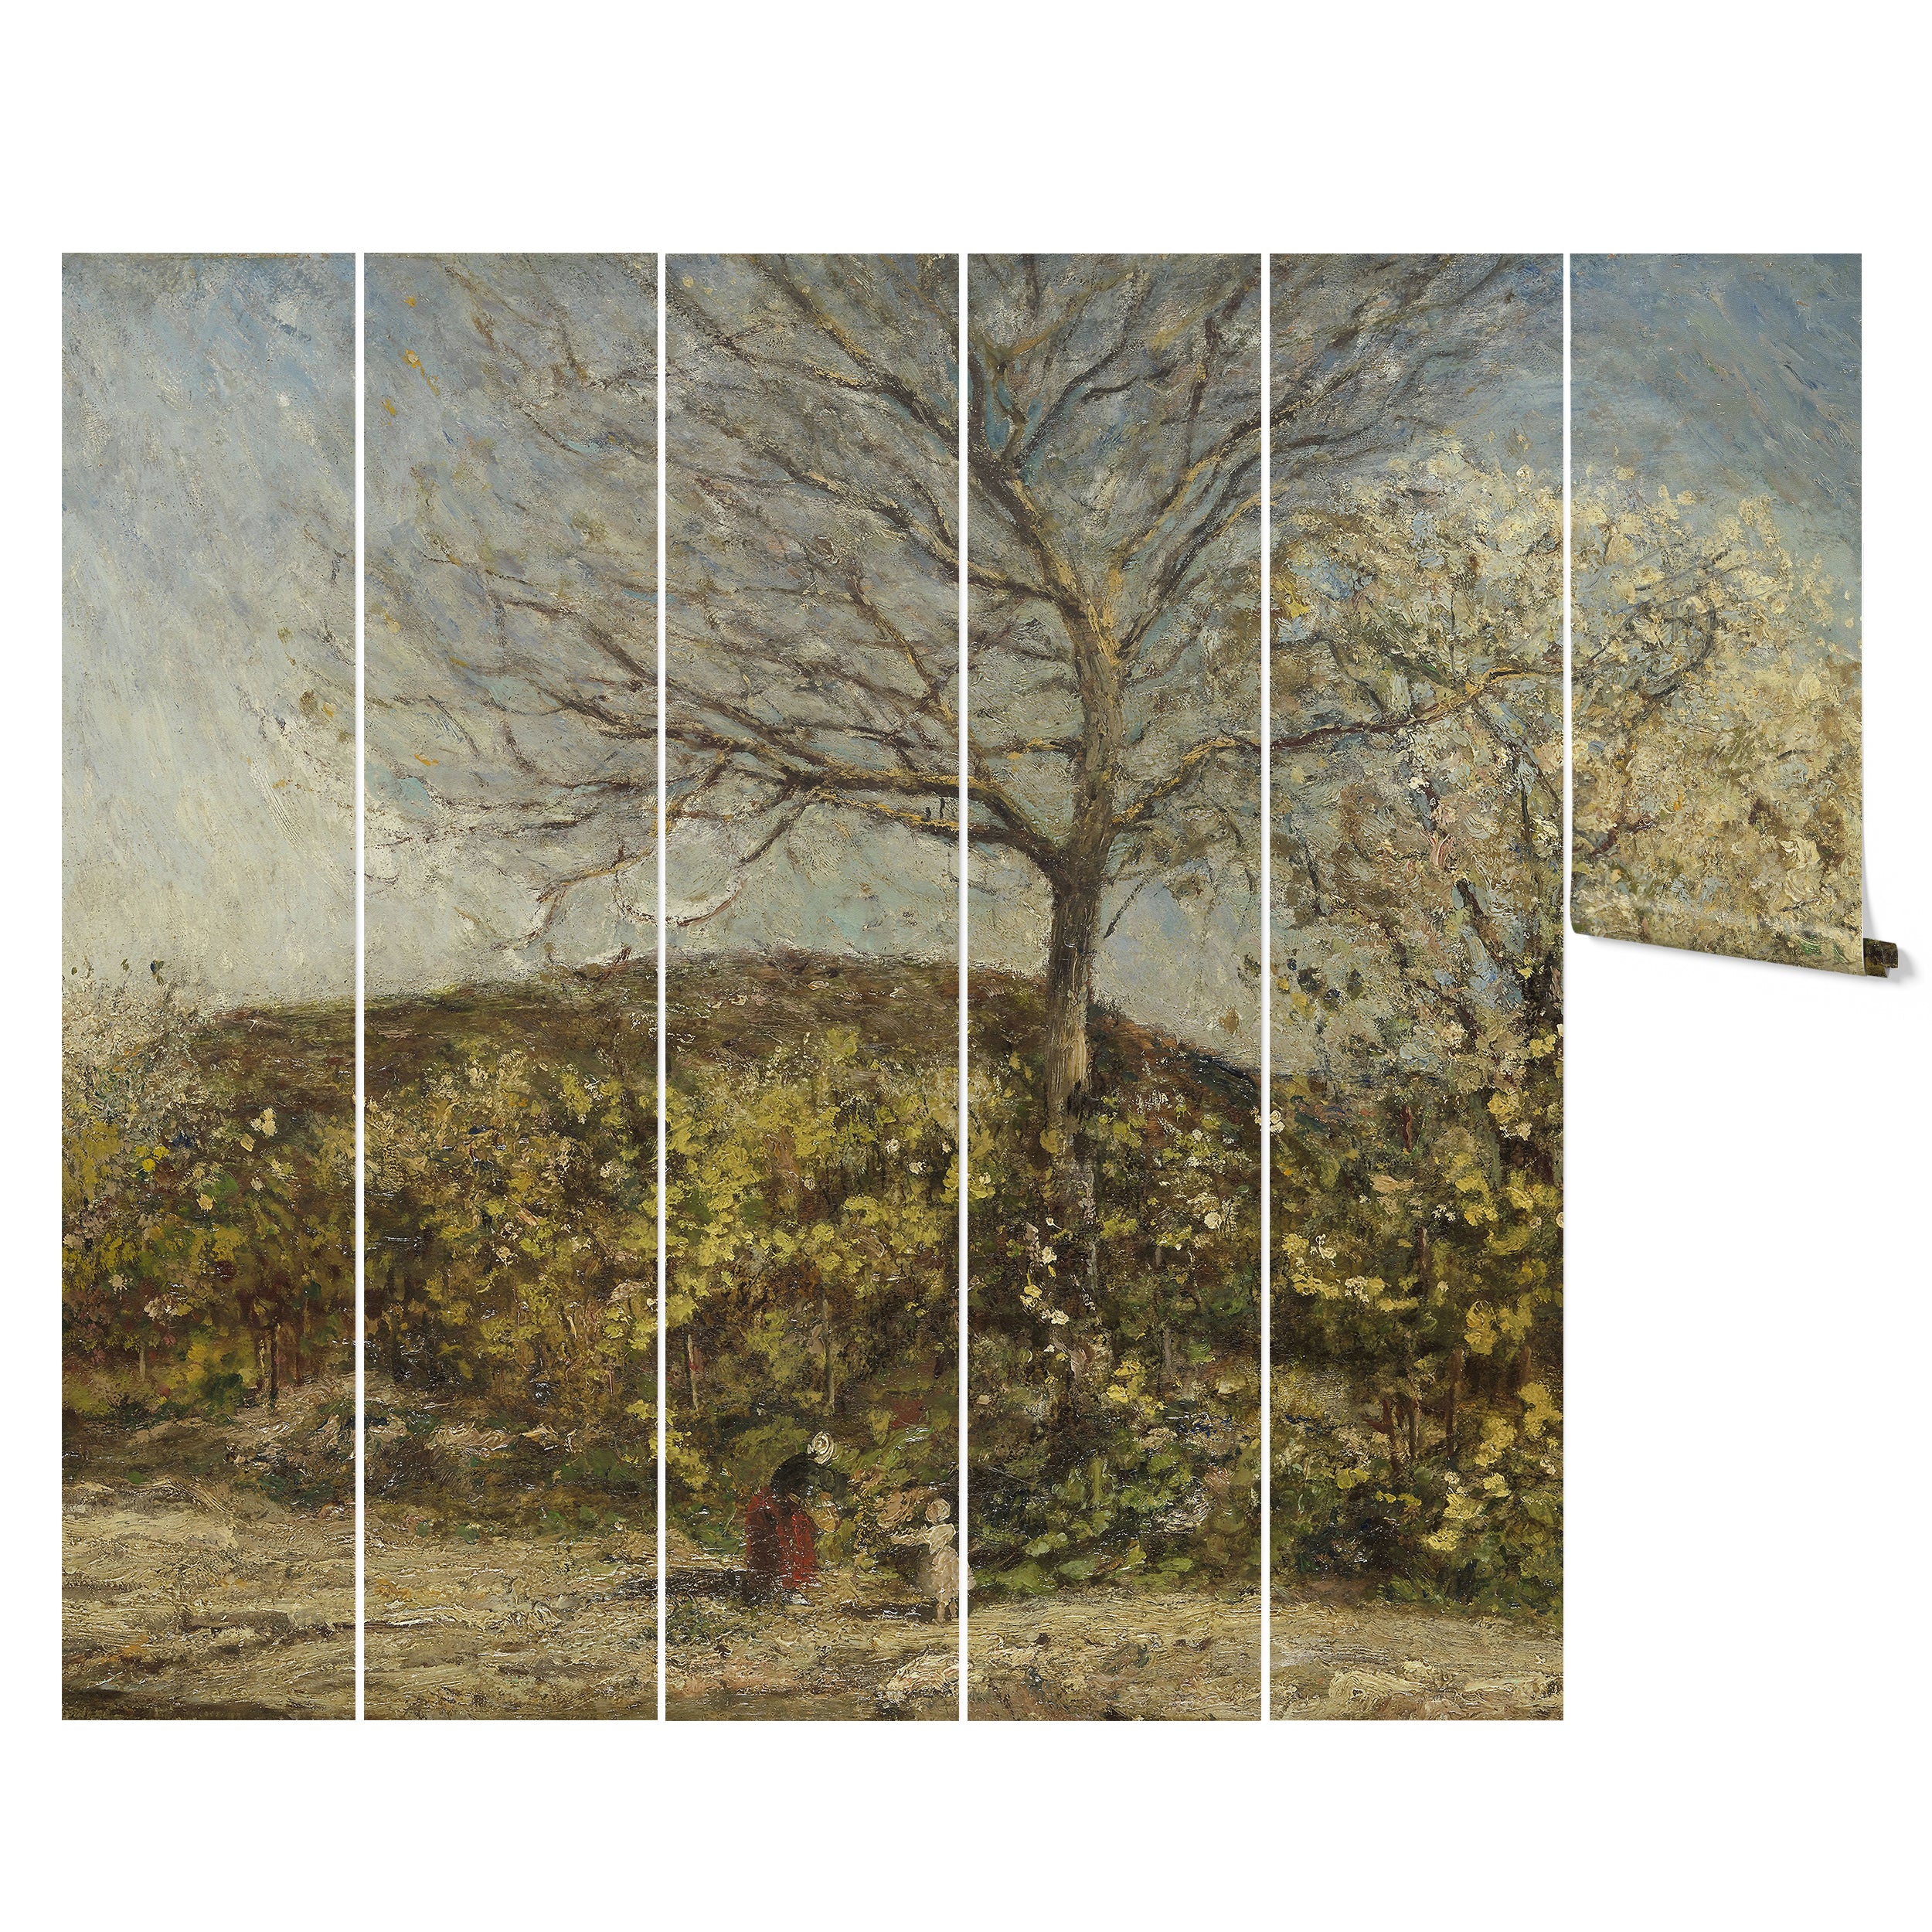 A panoramic view of a vintage wall mural divided into six panels, depicting a lush countryside scene with a tree at the center. The artwork captures a sense of depth and natural beauty, enhancing the aesthetic of any room.